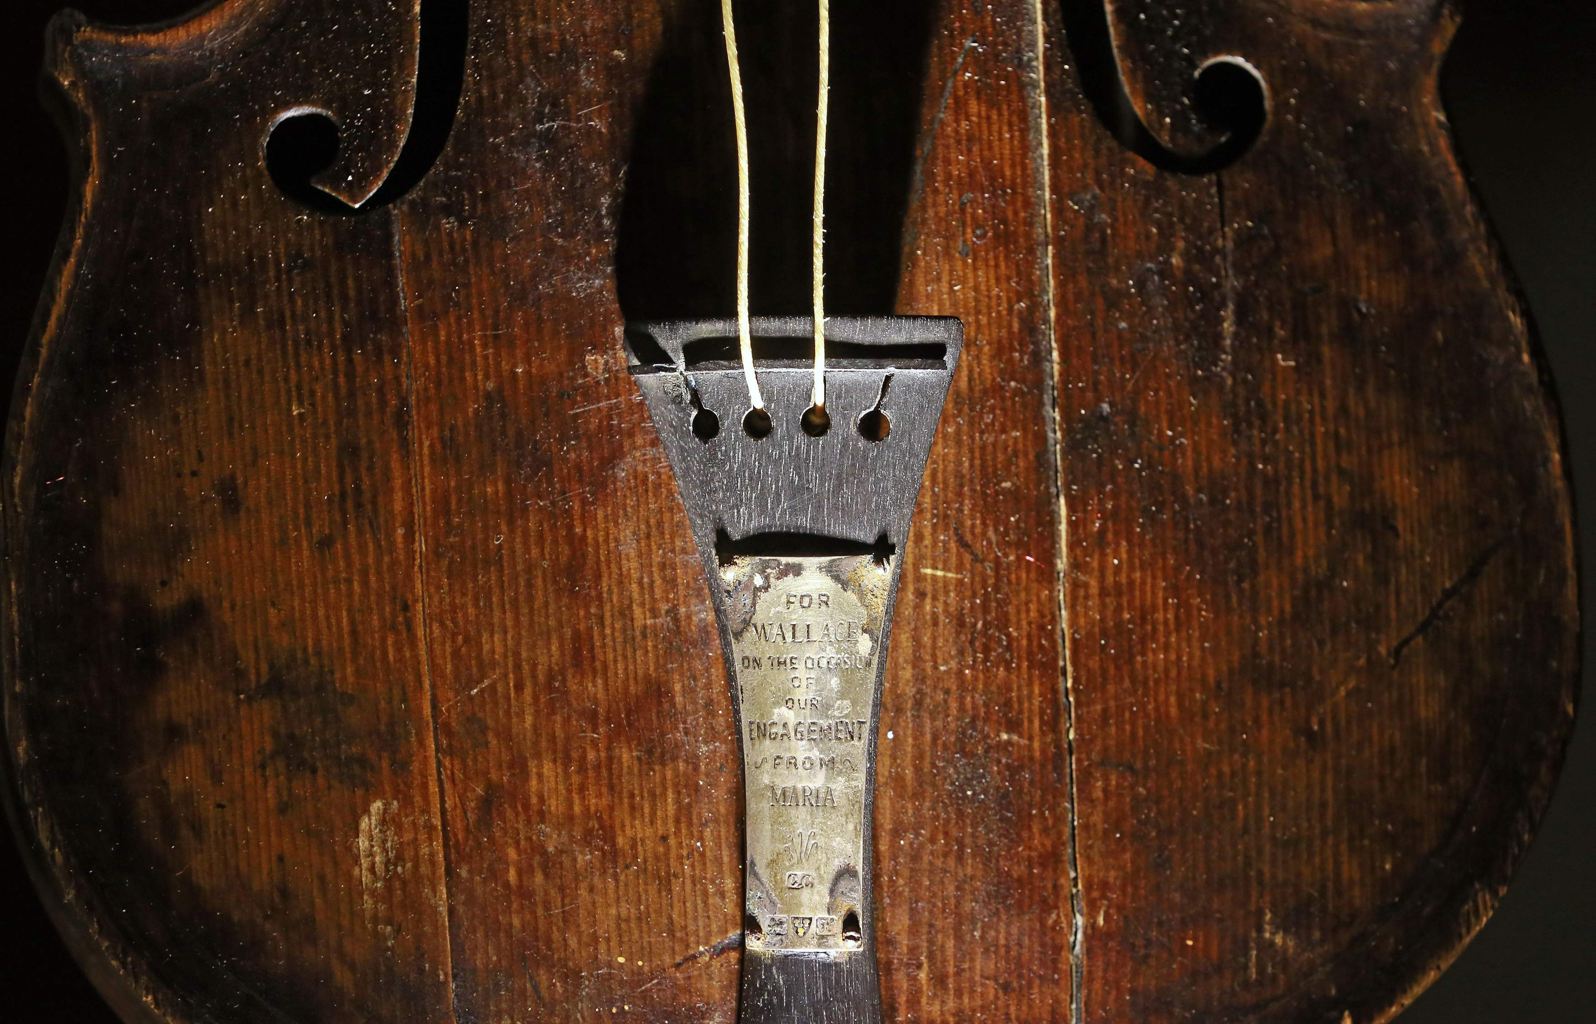 The violin belonging to Titanic bandmaster Wallace Hartley actually looks pretty creepy on display at the Titanic Belfast Centre. Photo from Reuters.com